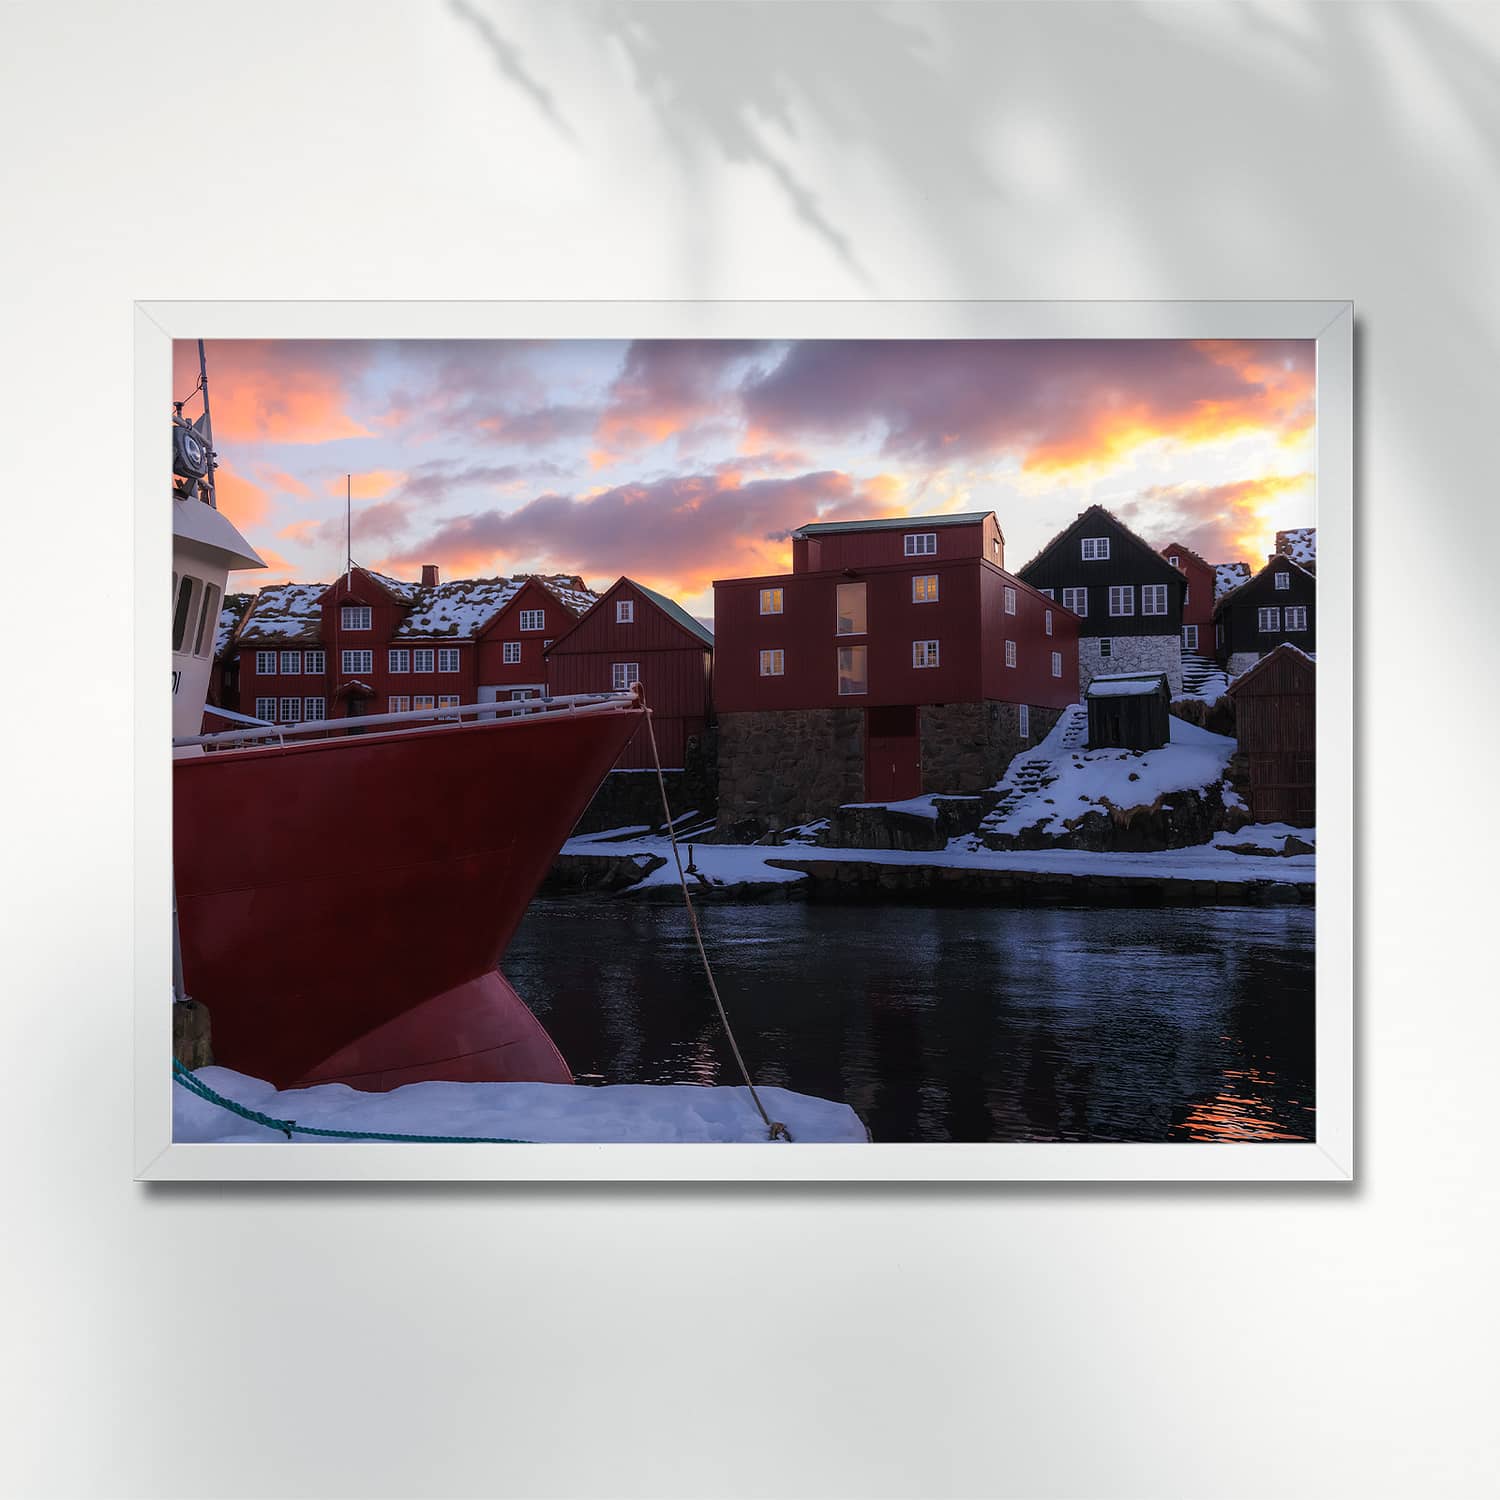 TINGANES AND THE HARBOUR AT SUNSET, FAROE ISLANDS - POSTER tinganes torshavn harbour sunset faroe islands poster frame